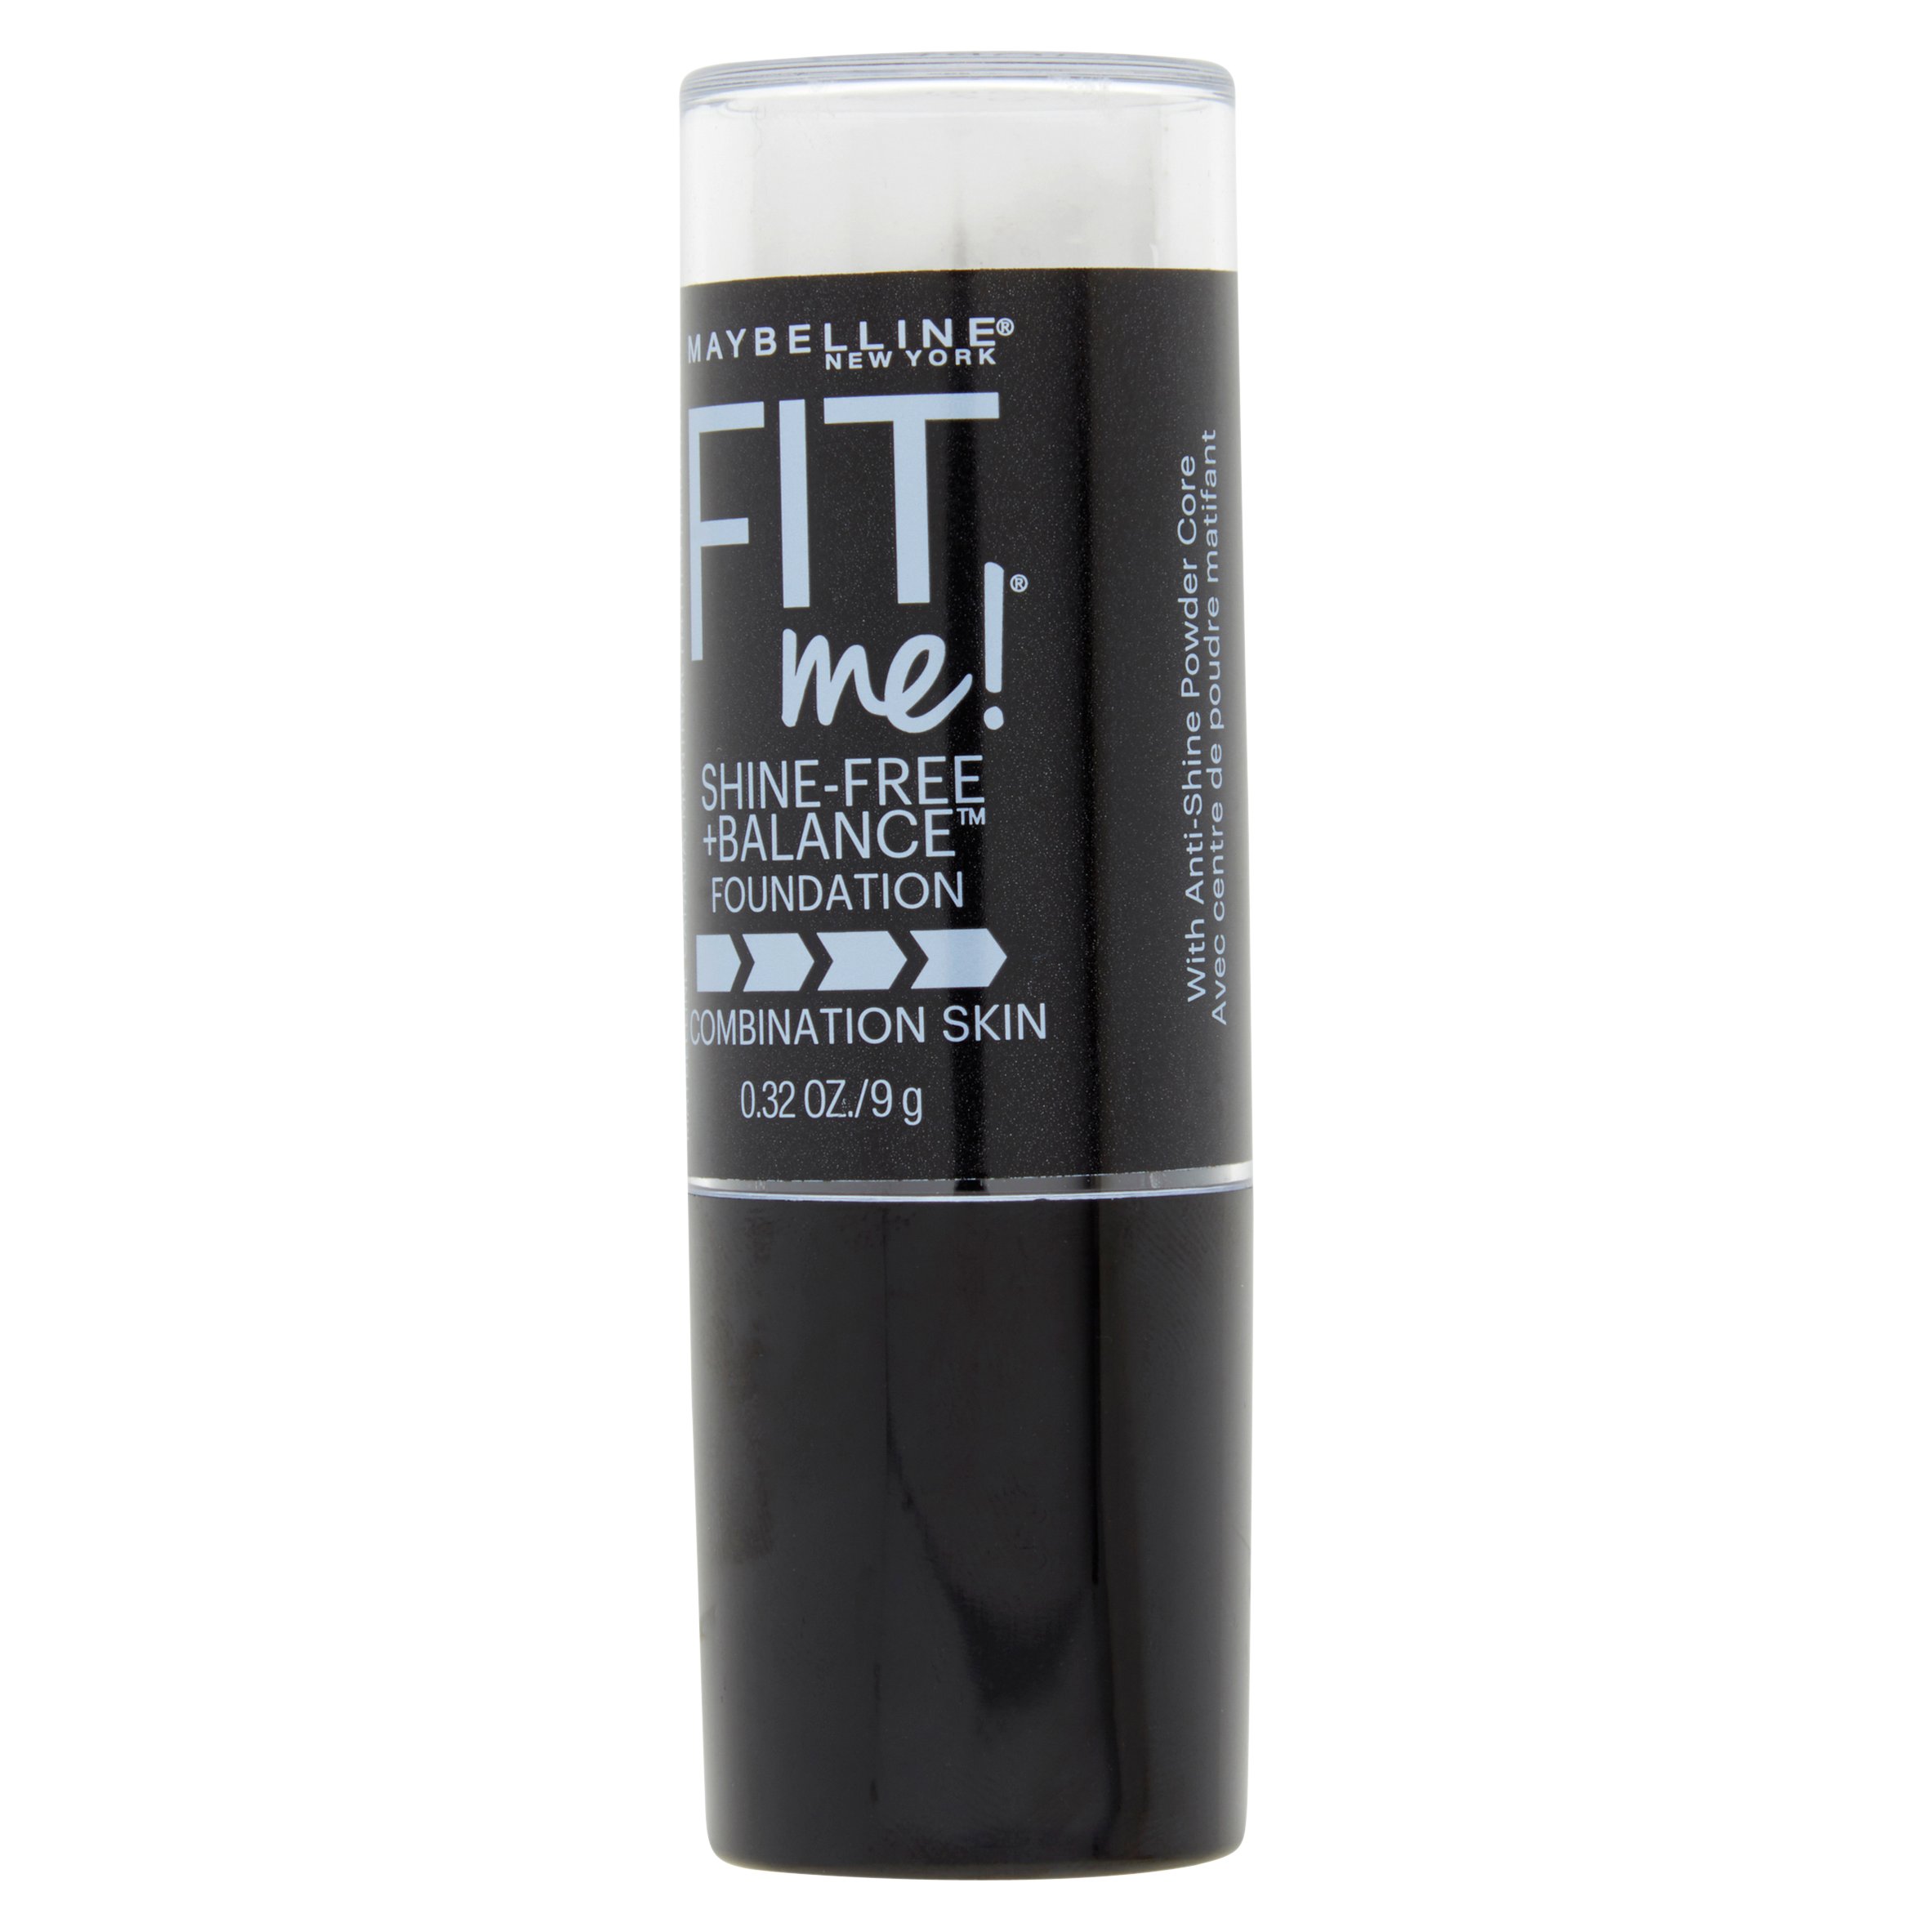 Maybelline Fit Me Shine-Free Stick Foundation Makeup, 120 Classic Ivory, 1 fl oz - image 5 of 6